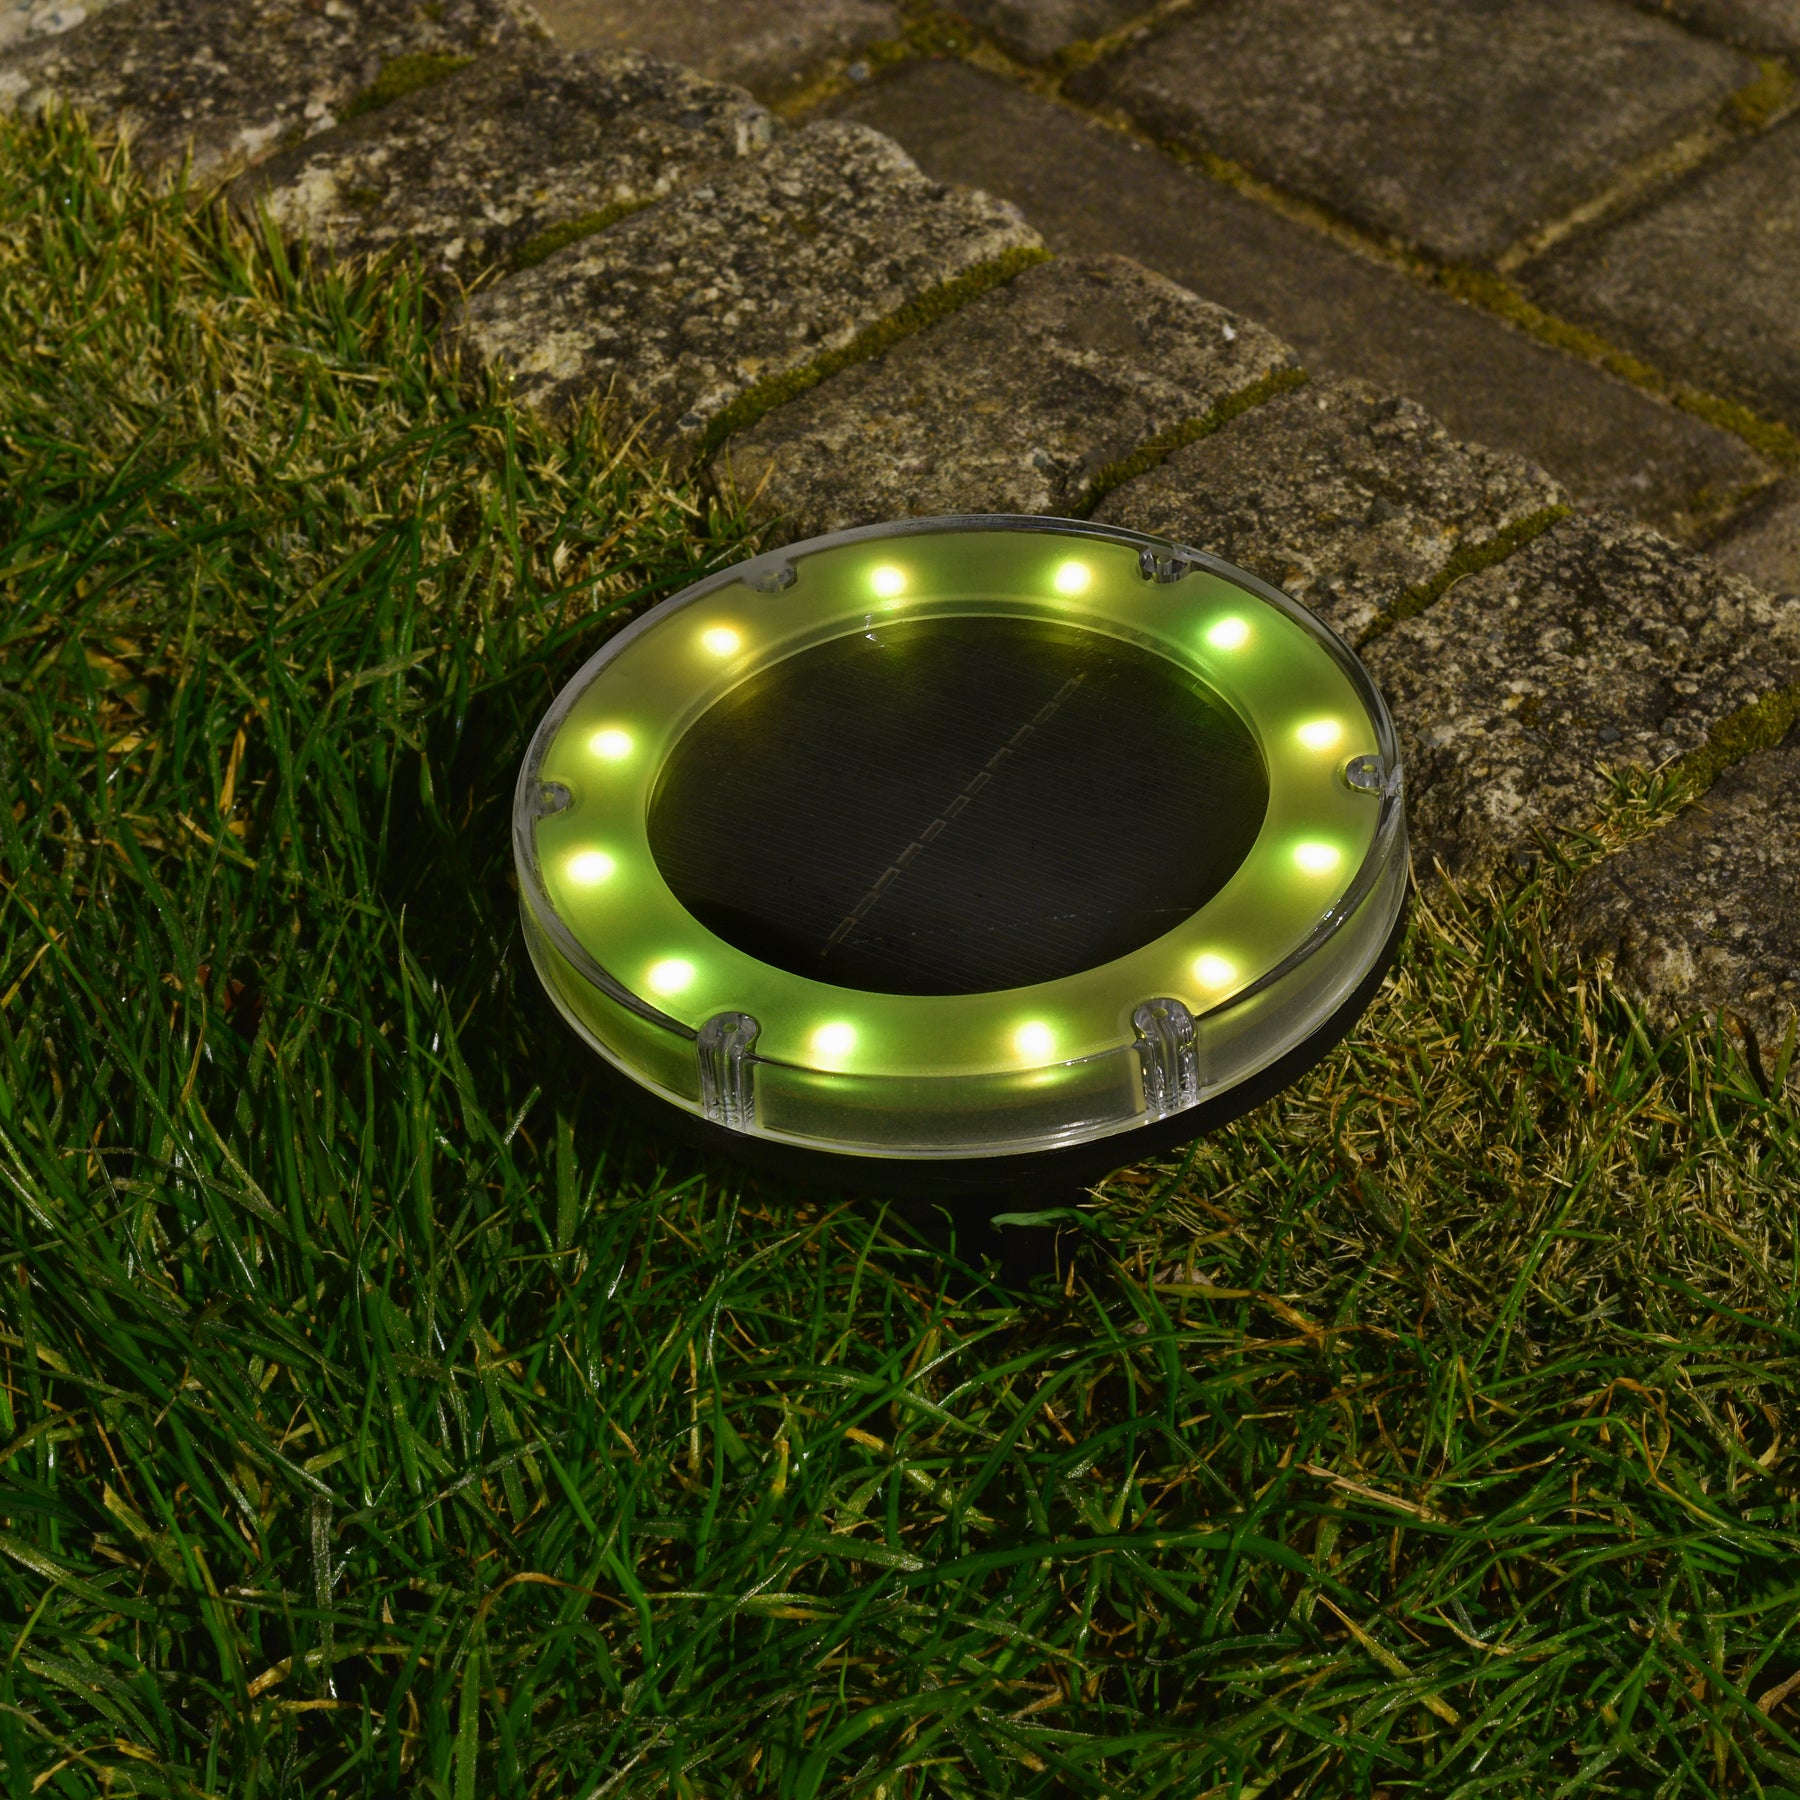 Bliss Outdoors Solar Powered Disc LED Pathway Light turned on and illuminating green.